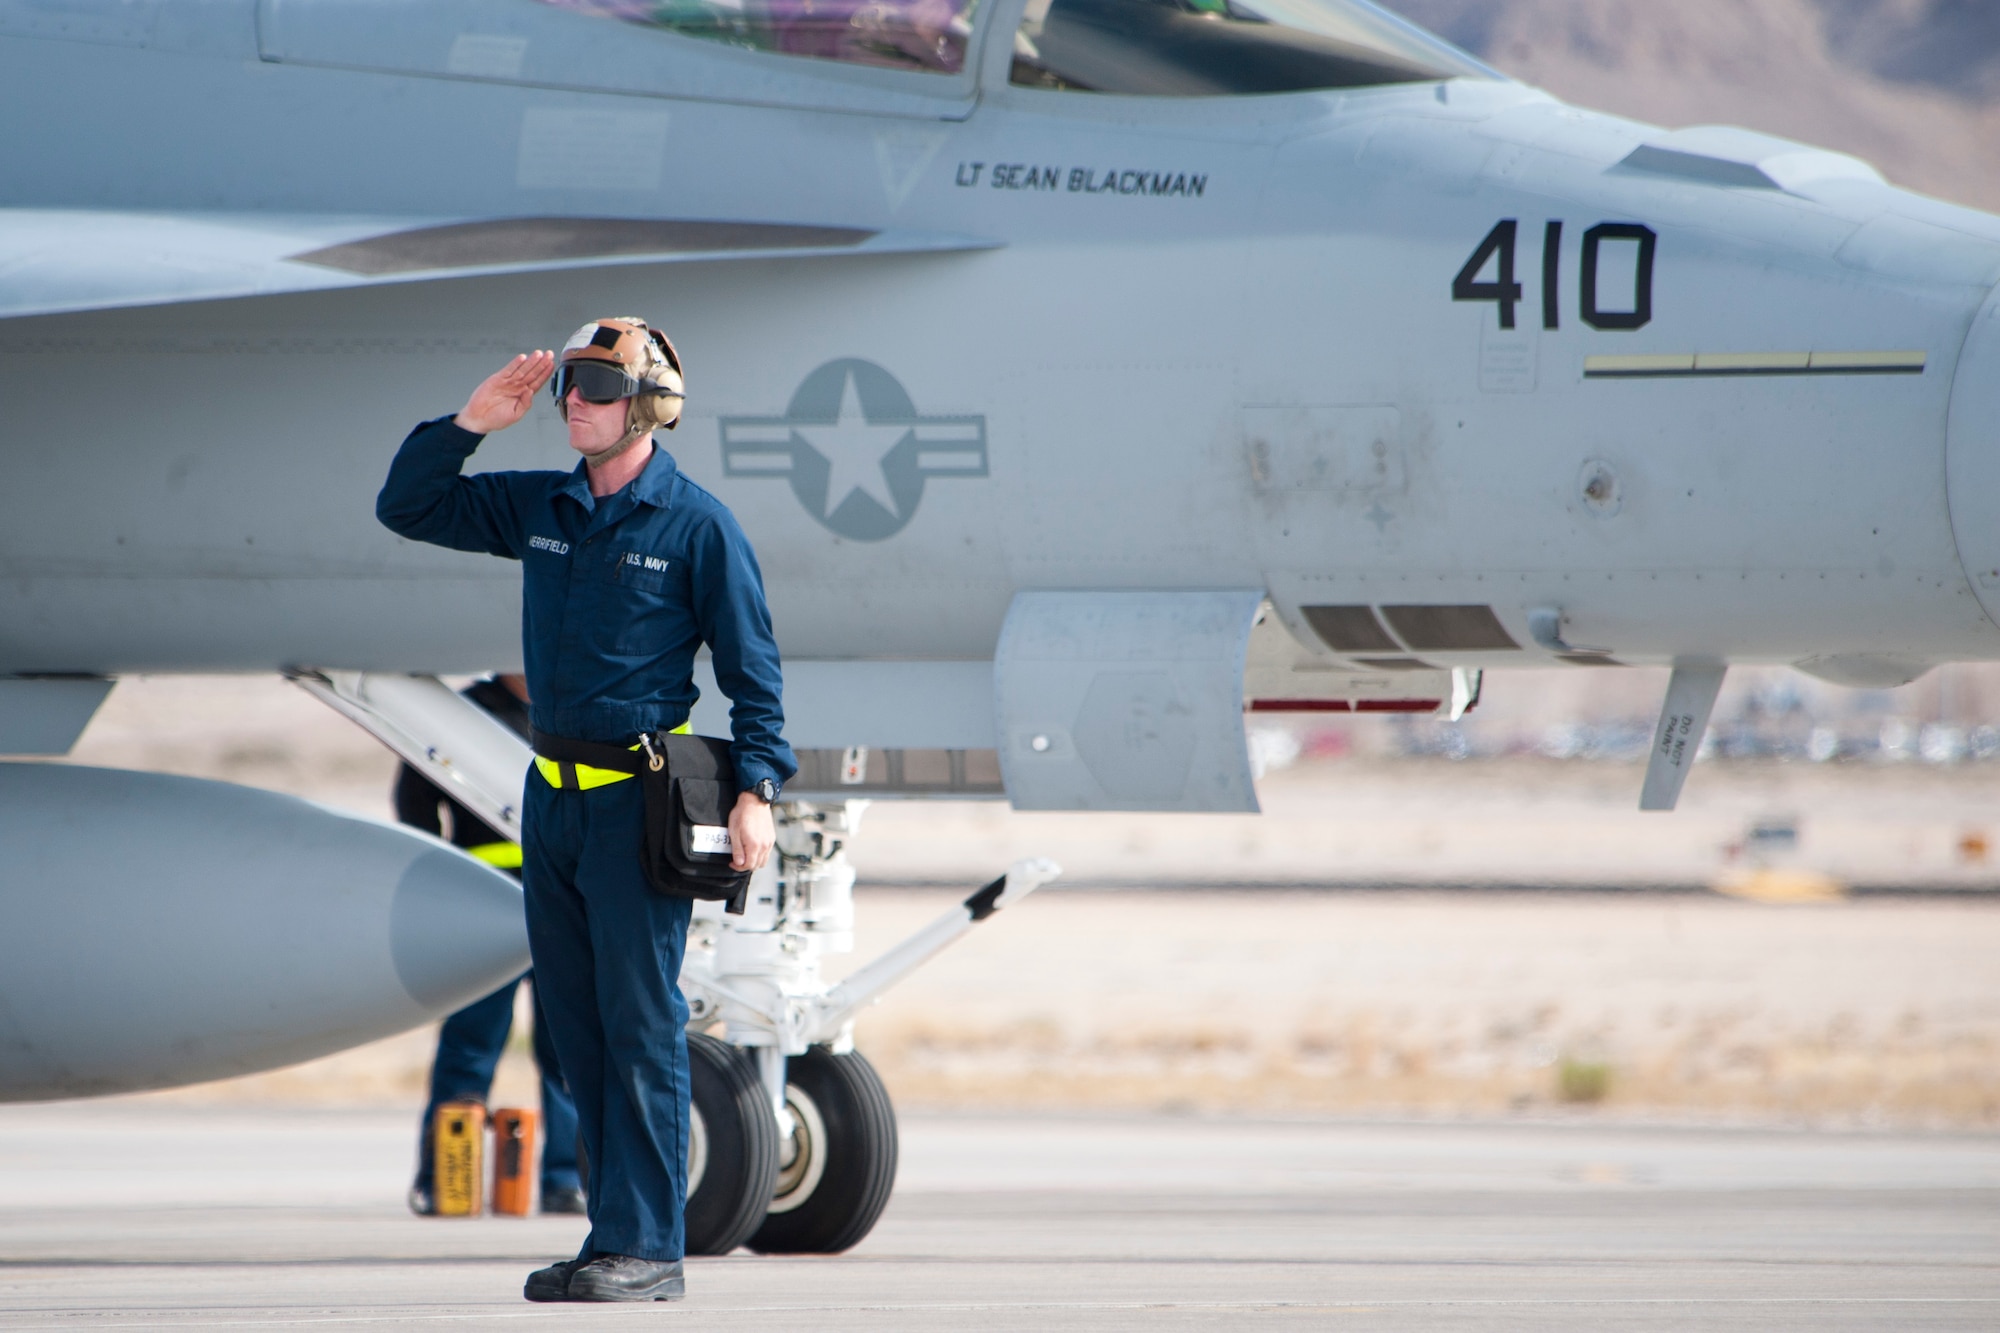 U.S. Navy Airman Ryan Merrifield, Strike Fighter Squadron 25 (VFA-25), Naval Air Station, Lemoore, Calif., plane captain, salutes as a signal of passing off ground control of an F/A-18E Hornet pilot prior to the aircraft taxiing onto the Nellis Air Force Base, Nev. active runway Jan. 25, 2013. The VFA-25 participation in Red Flag 13-2 trains ground workers on skills to launch aircraft in a joint and allied air forces training environment. (U.S. Air Force photo by Lawrence Crespo)